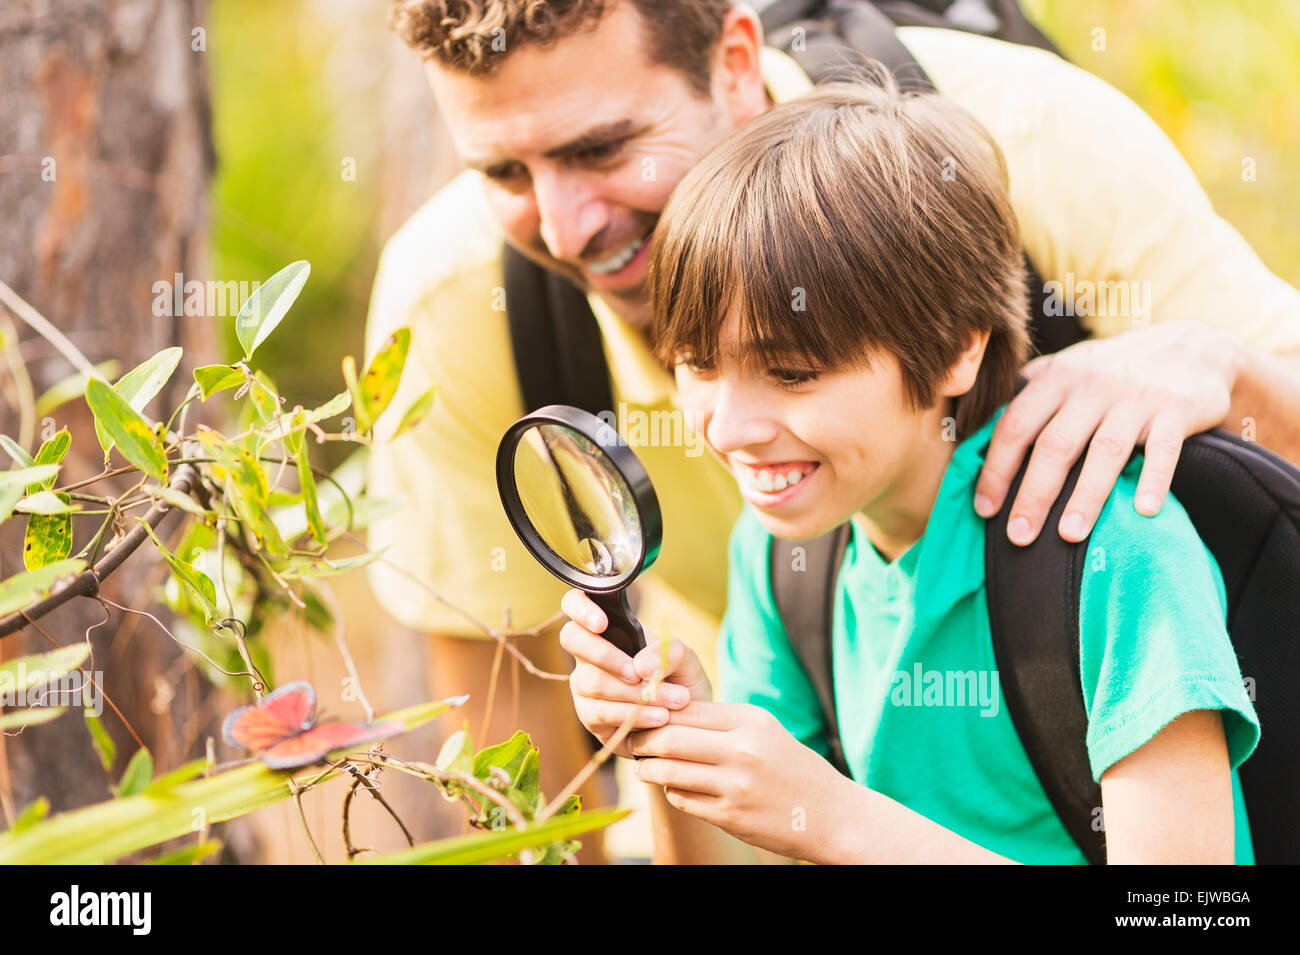 USA, Florida, Jupiter, Father and son (12-13) watching butterfly with magnifying glass Stock Photo